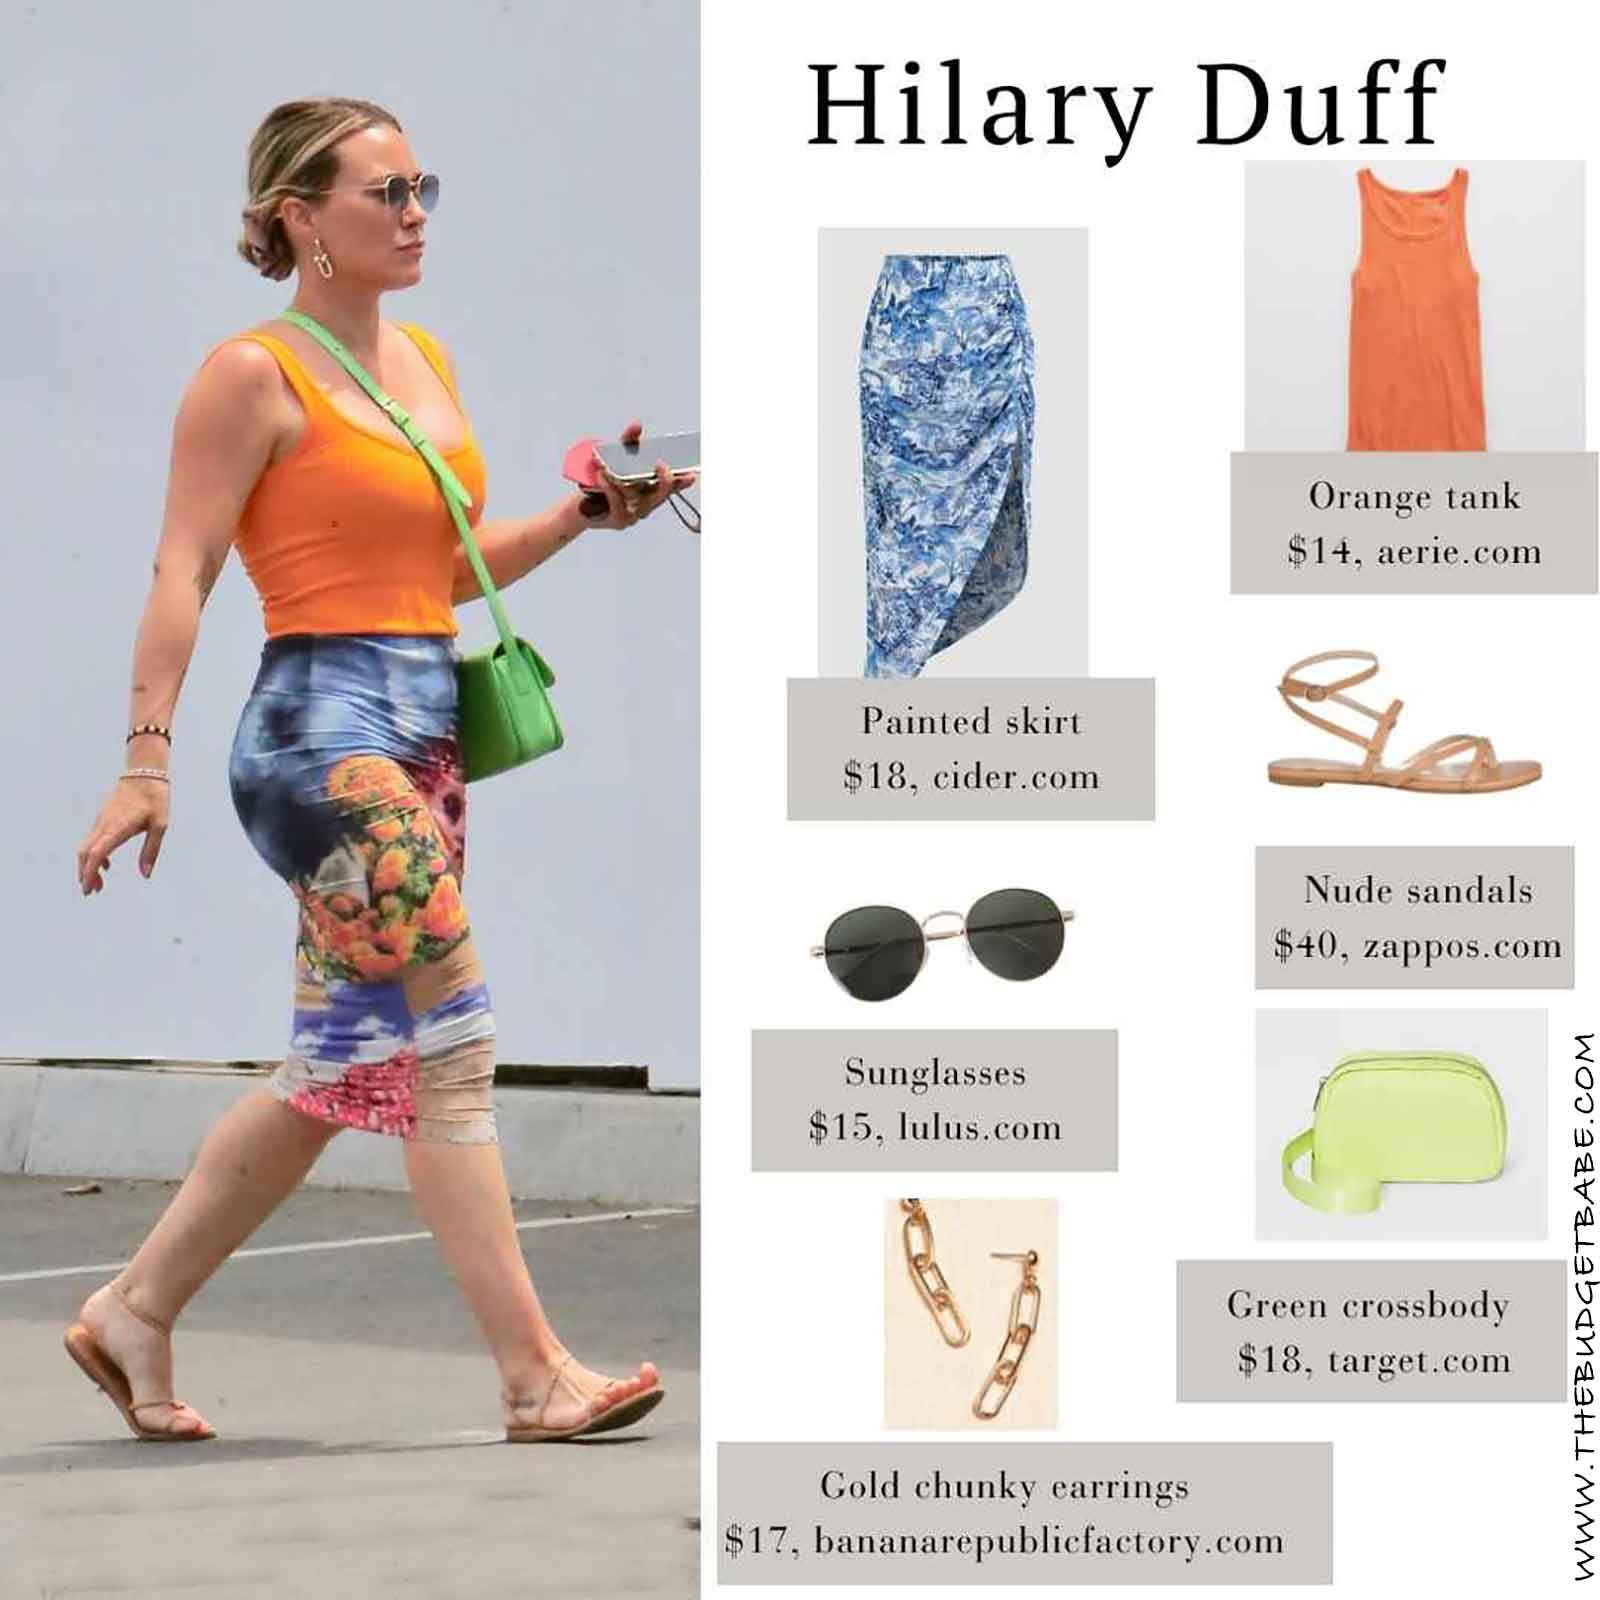 Hilary Duff in an orange tank and colorful multicolor painterly pencil skirt.